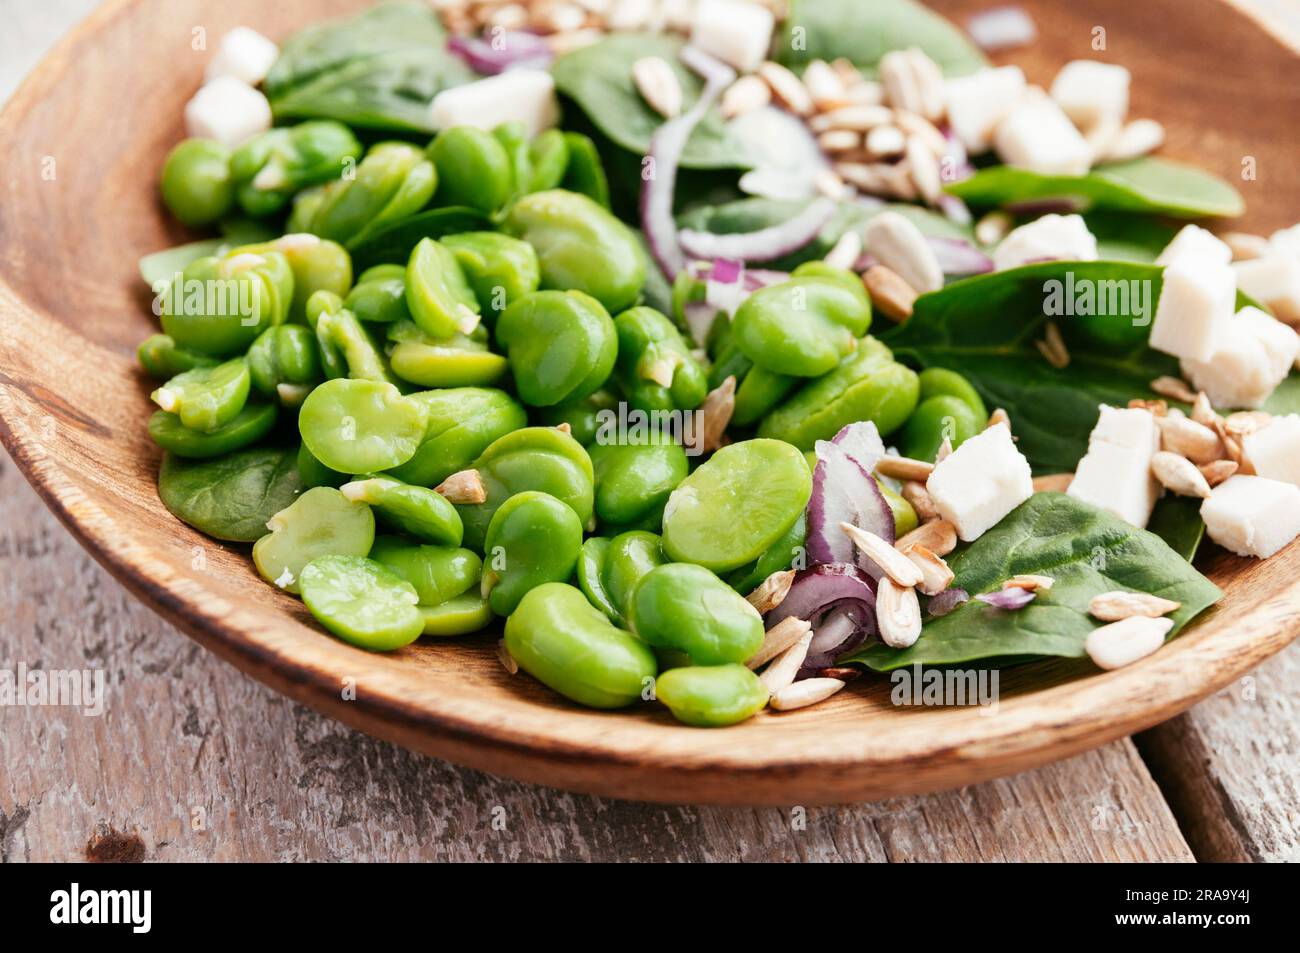 A fresh salad with shelled fava beans, baby spinach leaves, red onion, pine nuts and crumbled soy cheese. Stock Photo